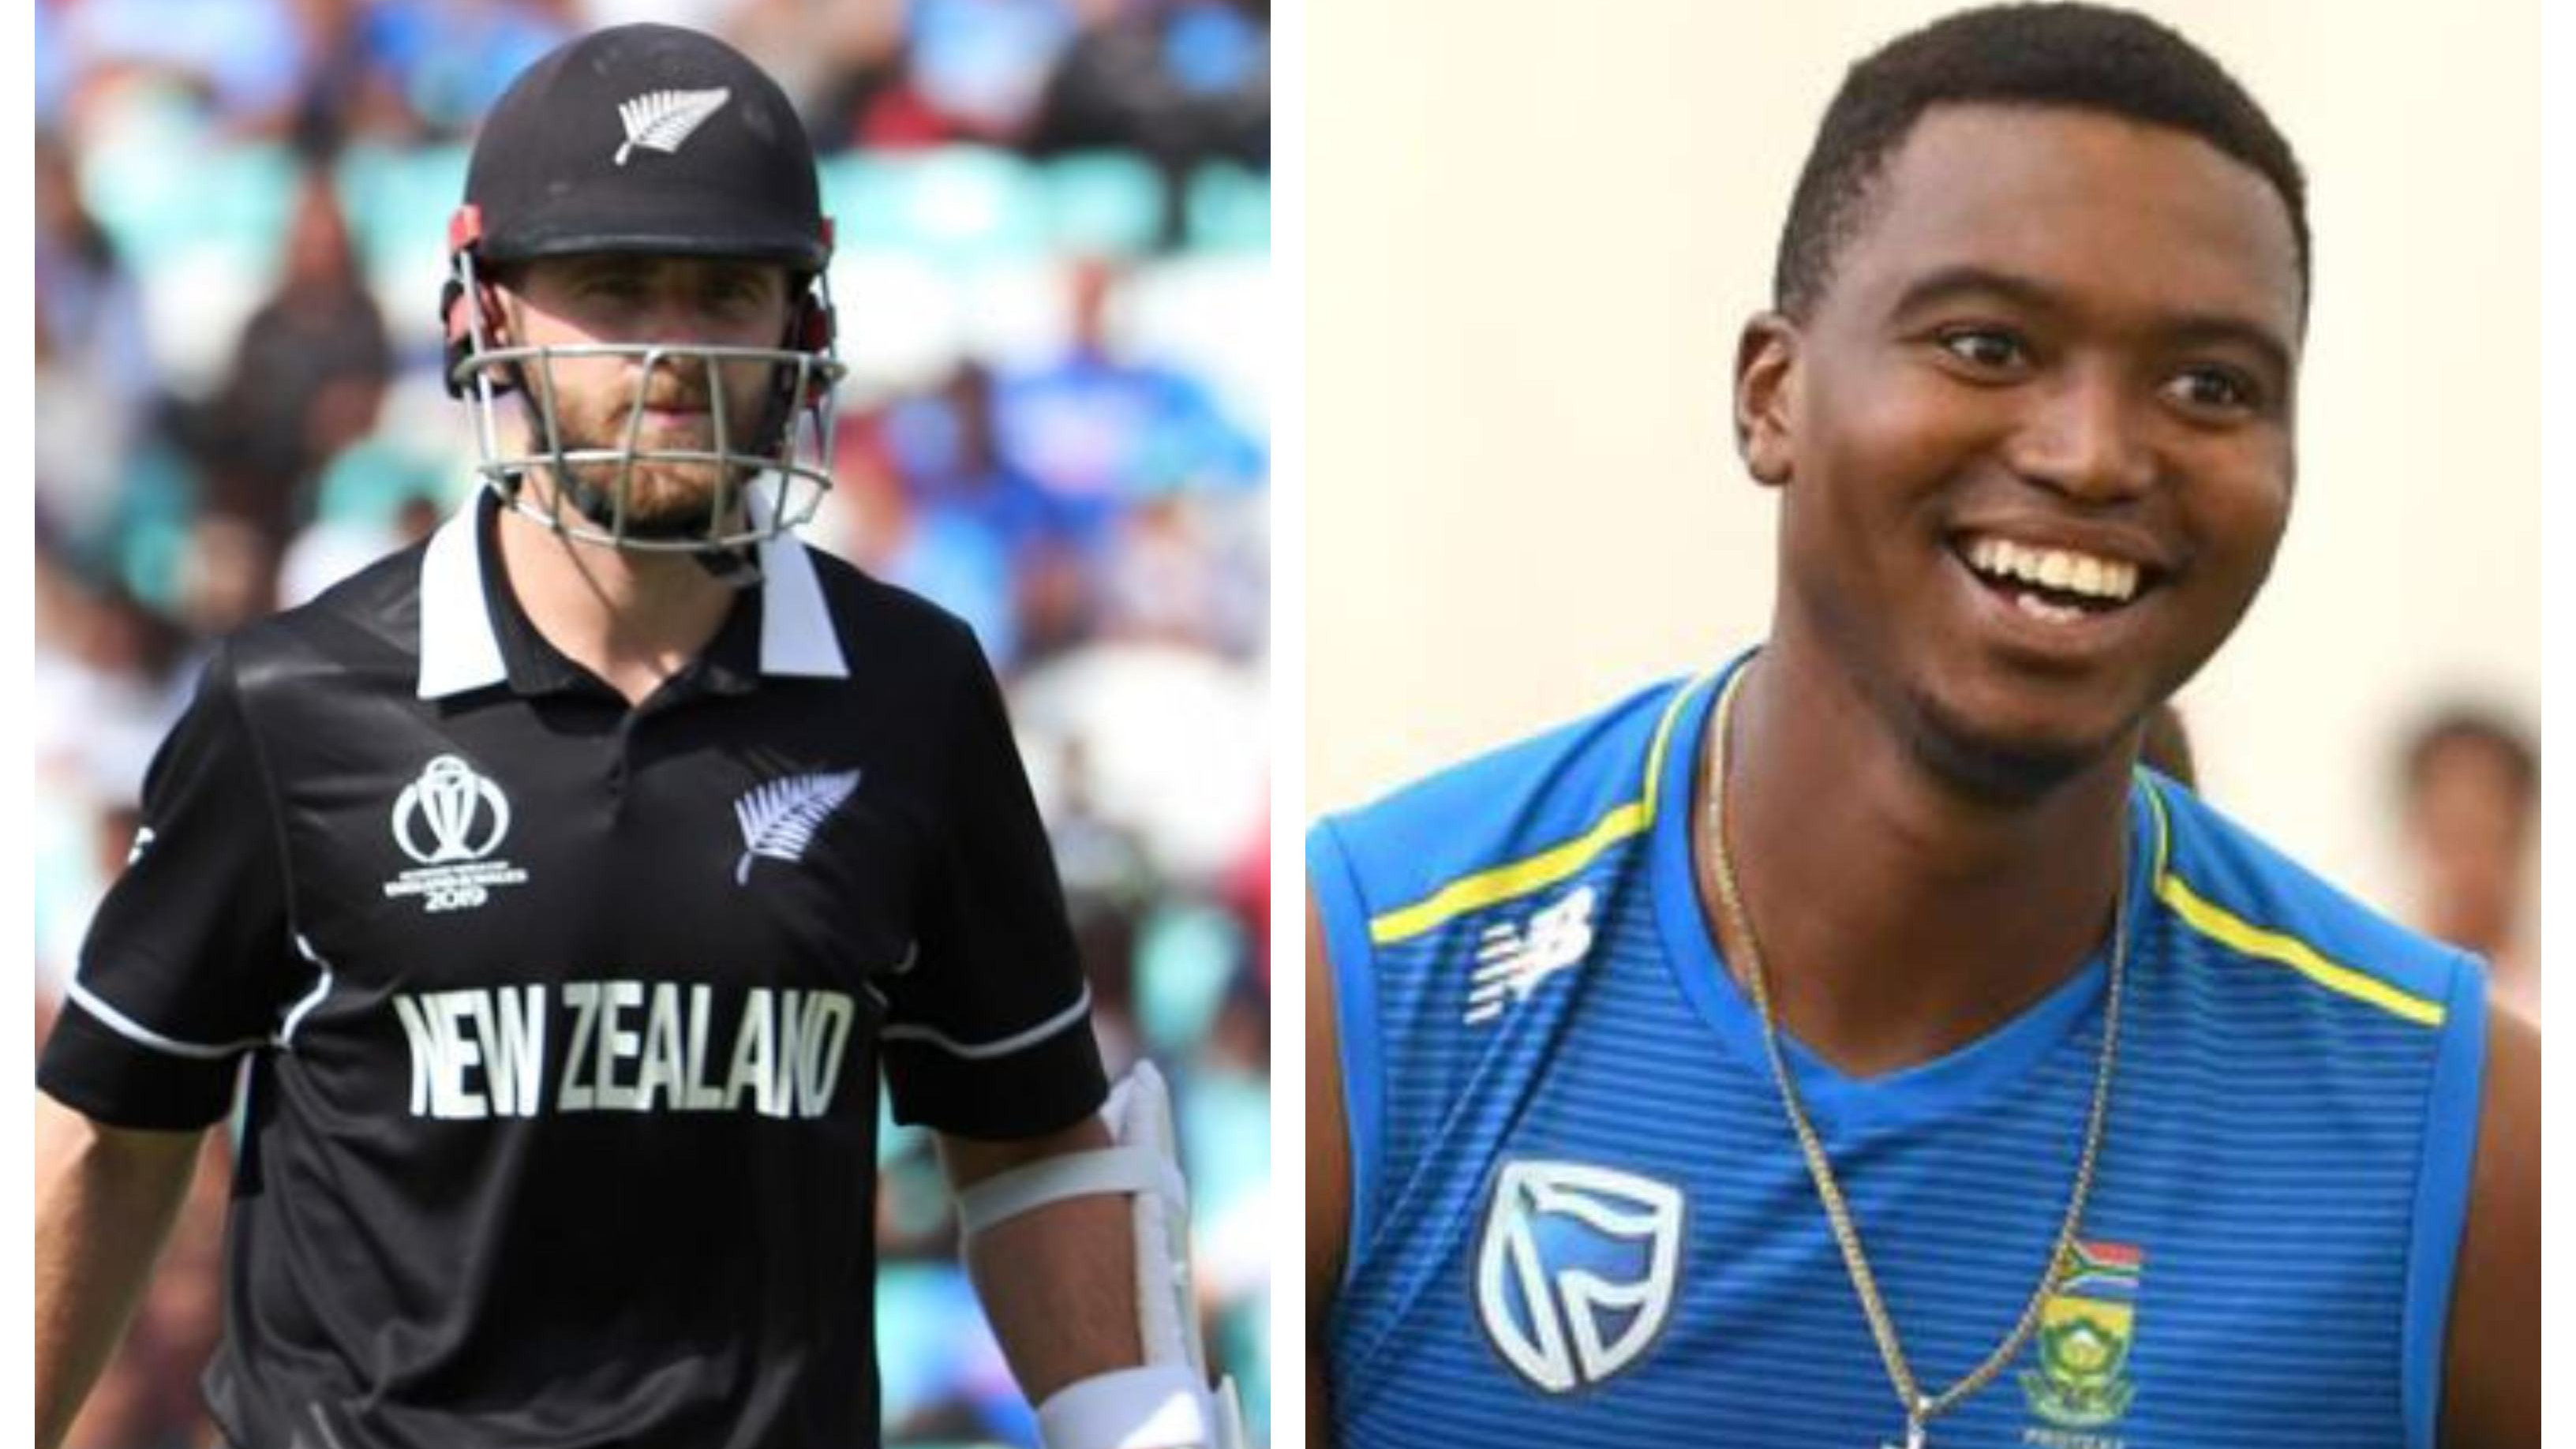 Kane Williamson opts out of The Hundred; Lungi Ngidi set to join Welsh Fire